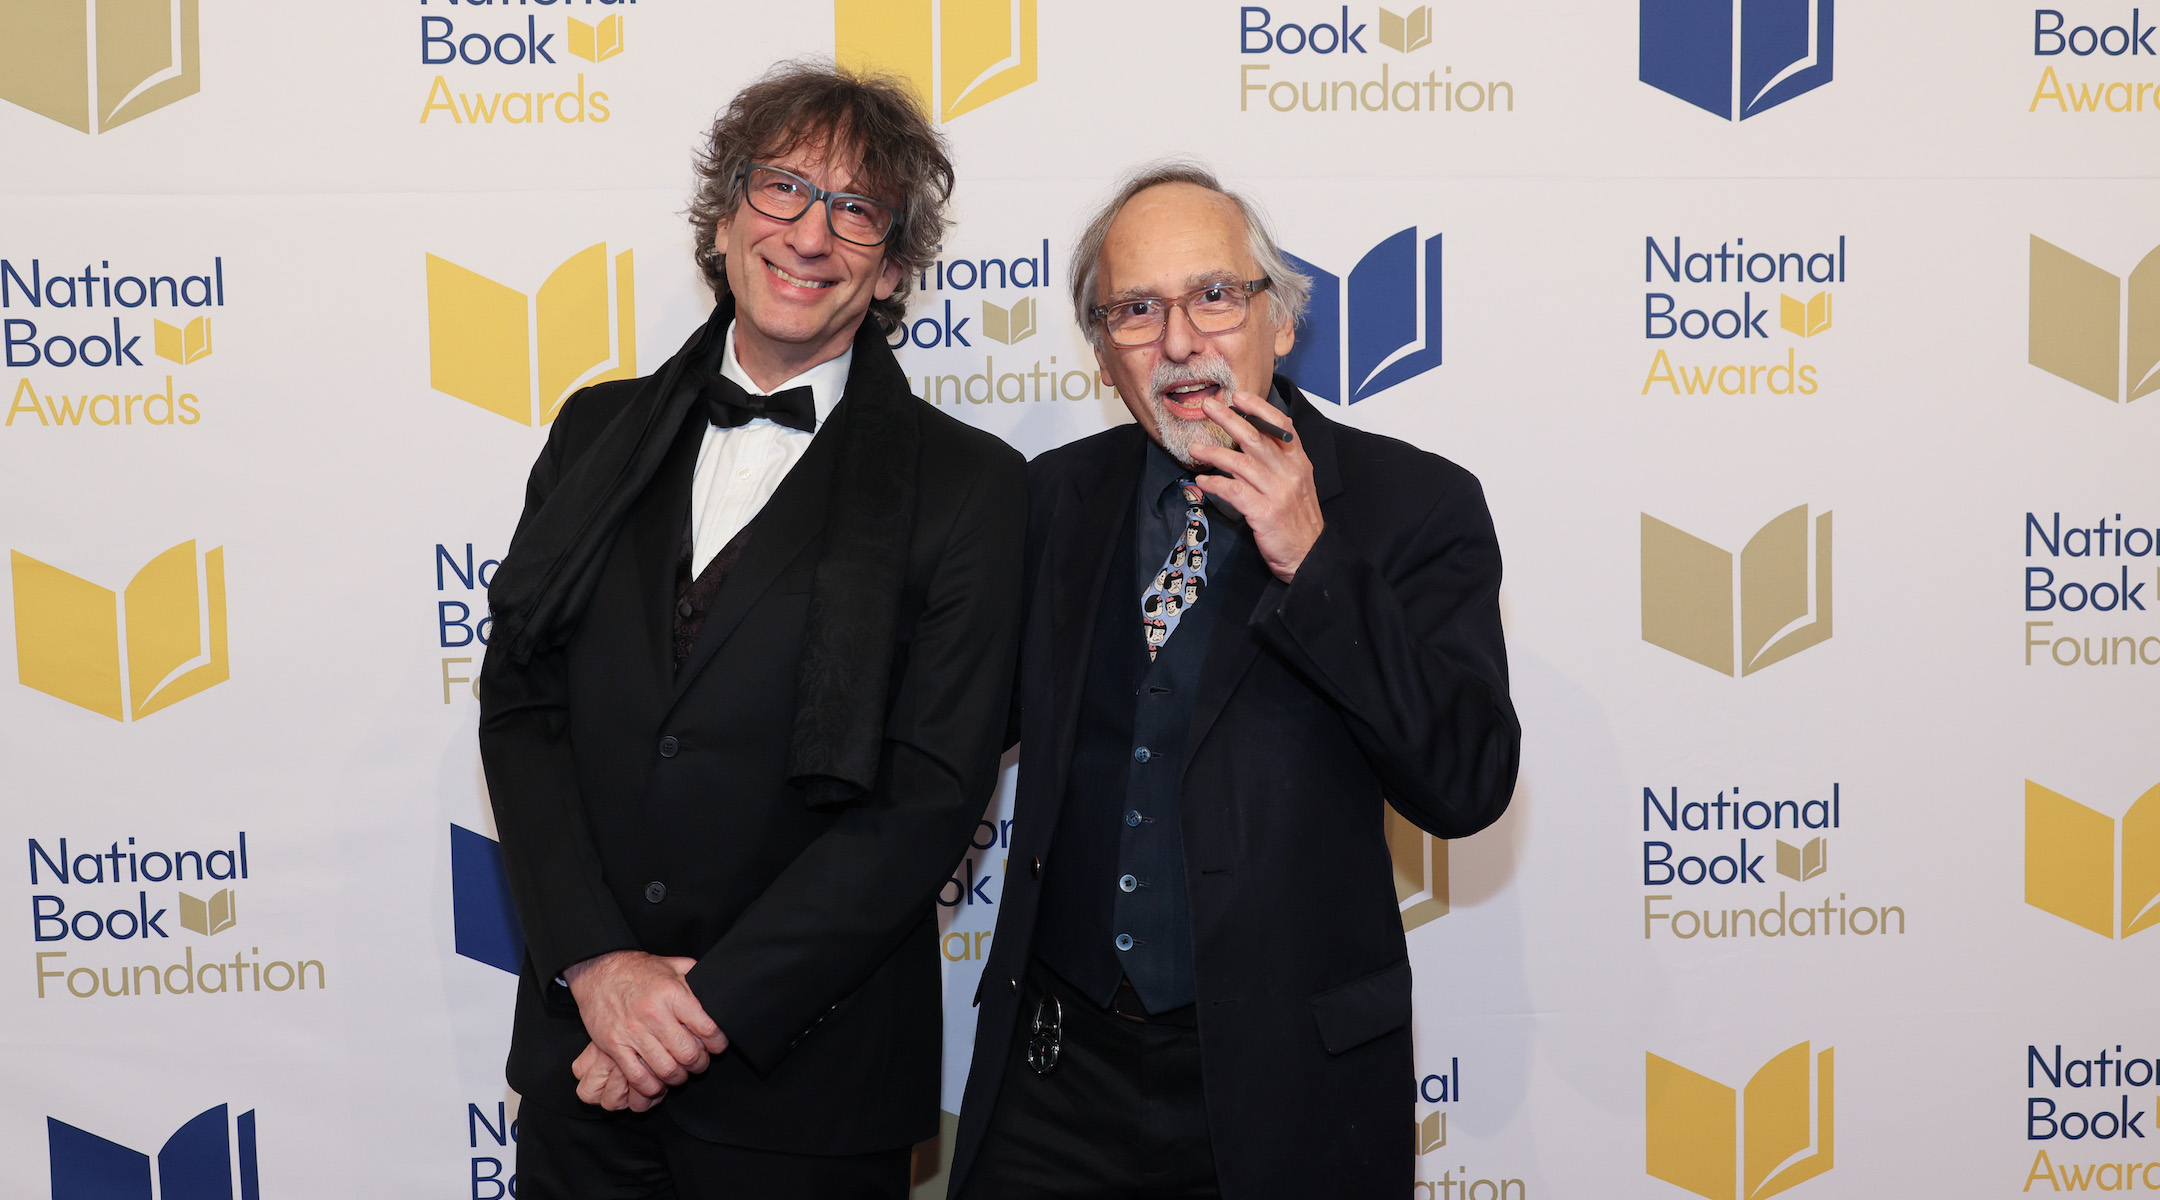 Authors at a red carpet event